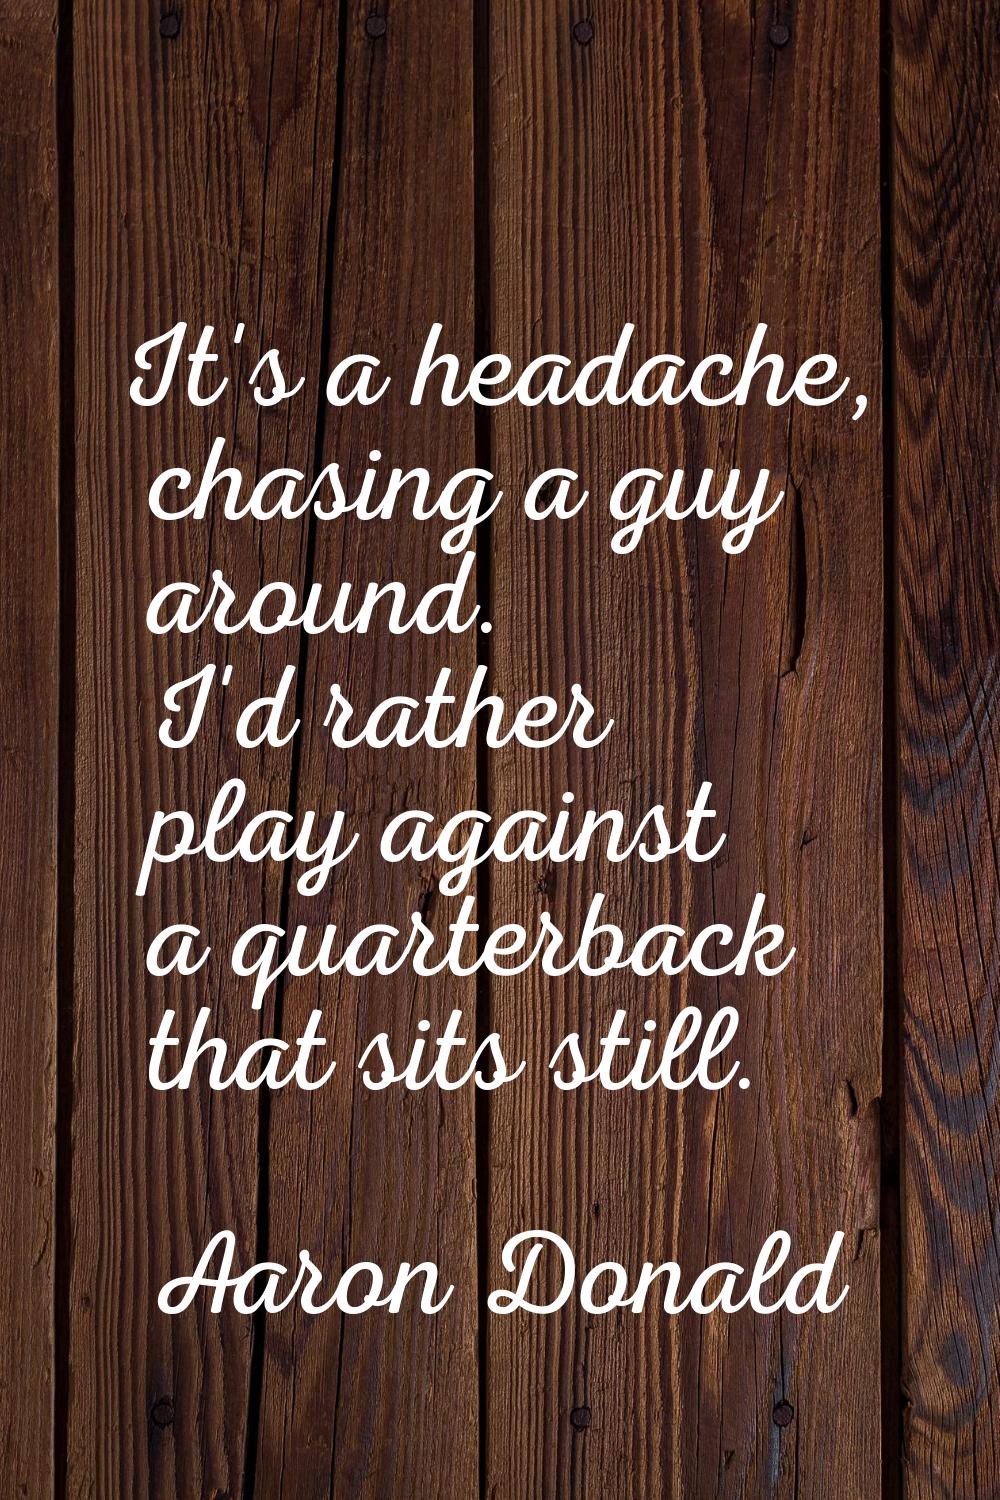 It's a headache, chasing a guy around. I'd rather play against a quarterback that sits still.